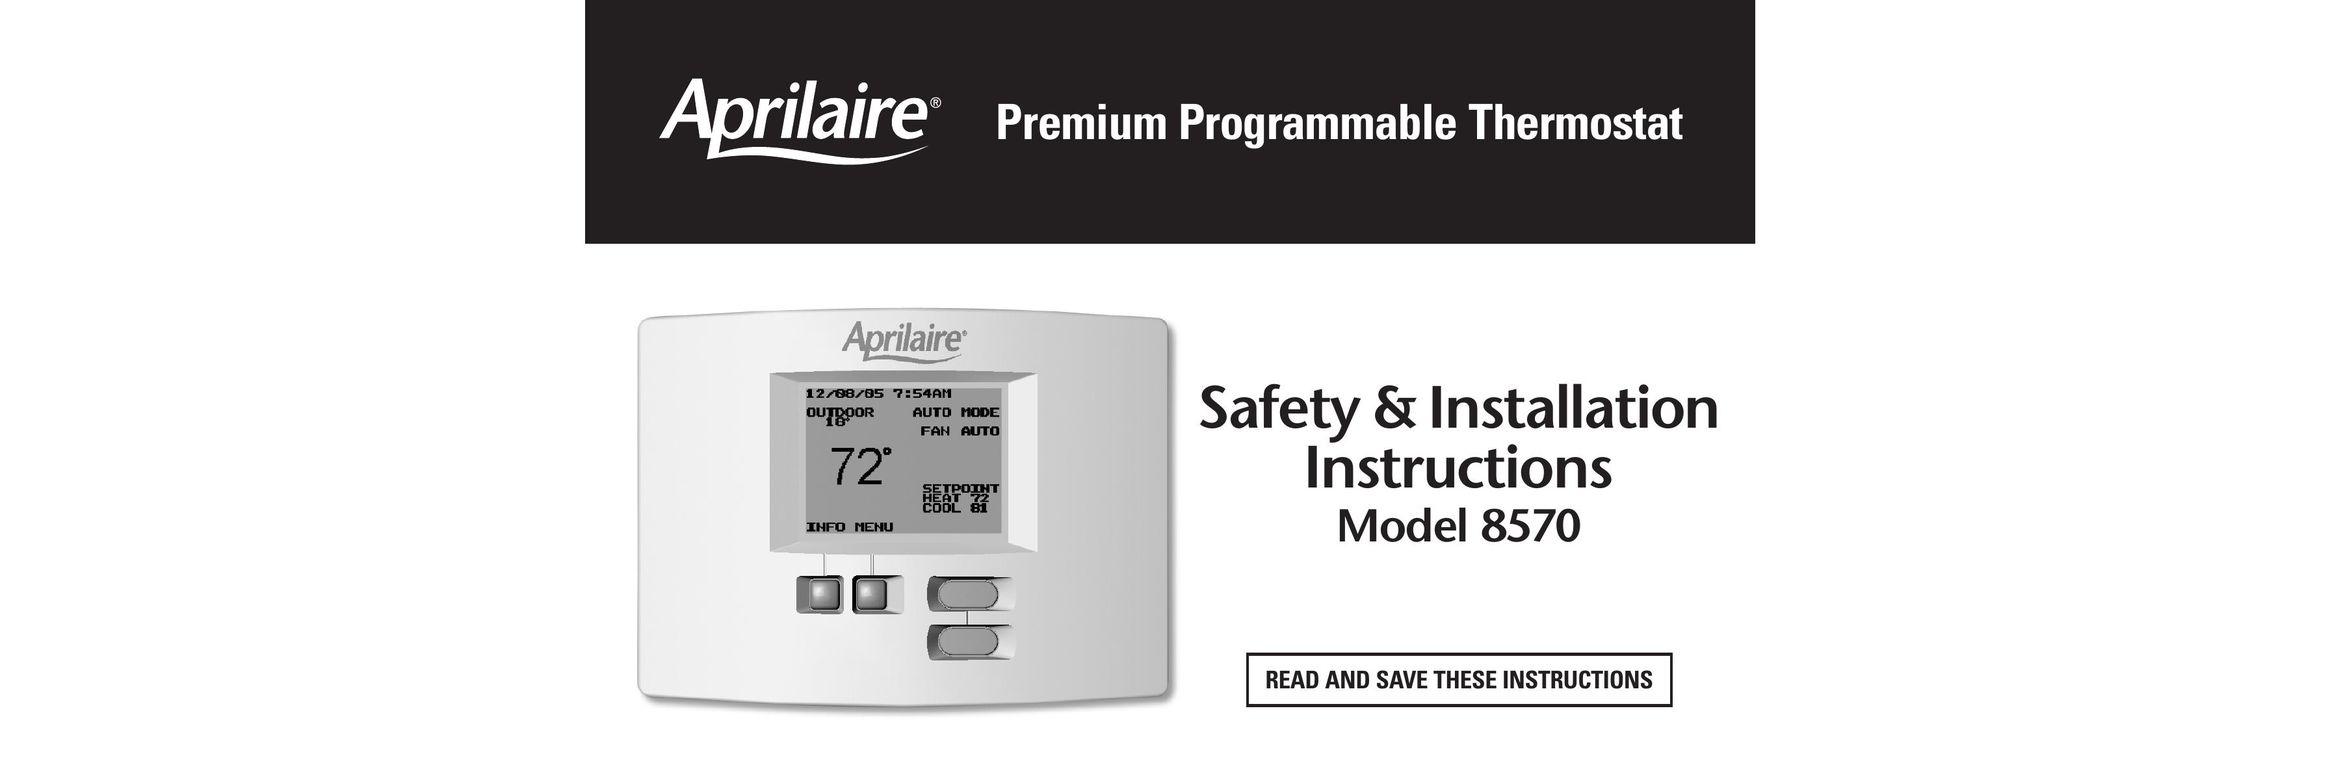 Aprilaire 8570 Thermostat User Manual